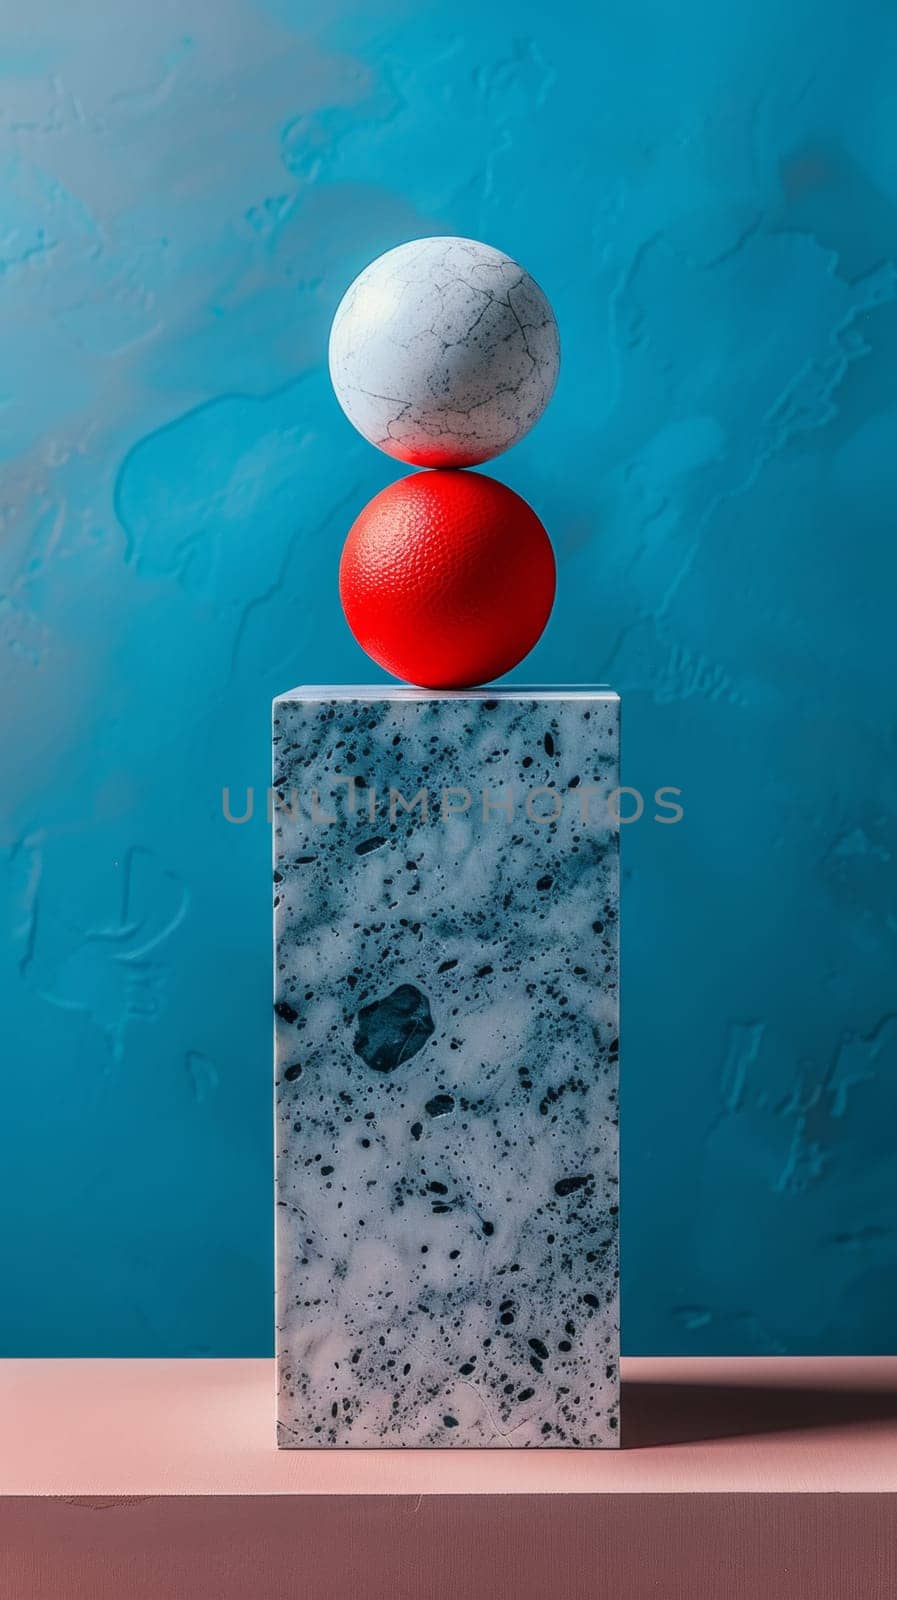 A marble sculpture with two eggs on top of it sitting next to a blue wall